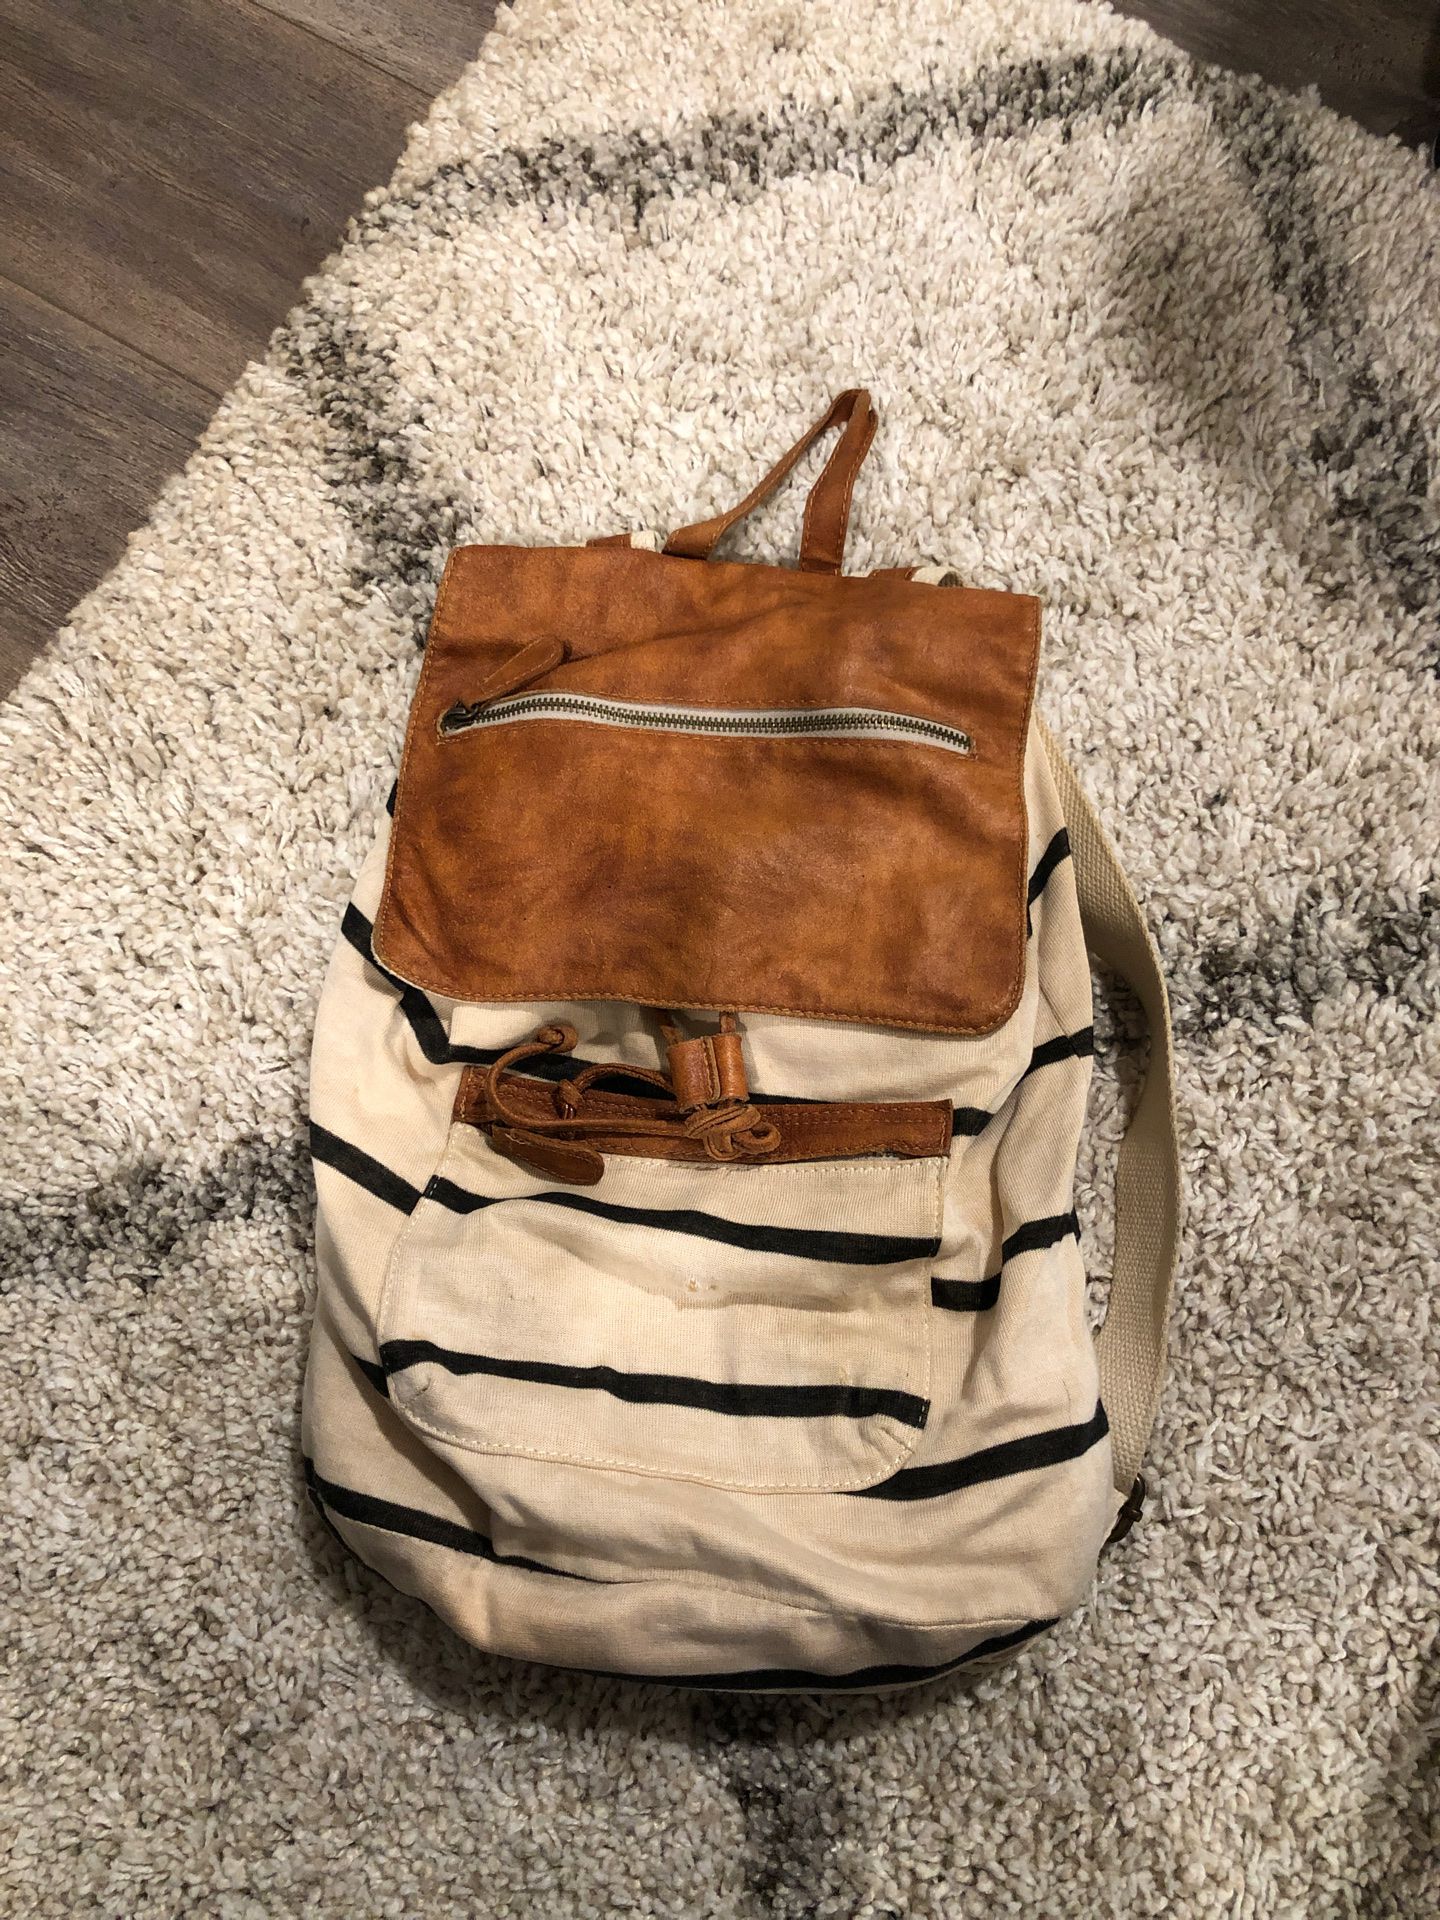 Striped Brandy Melville Backpack Genuine Leather